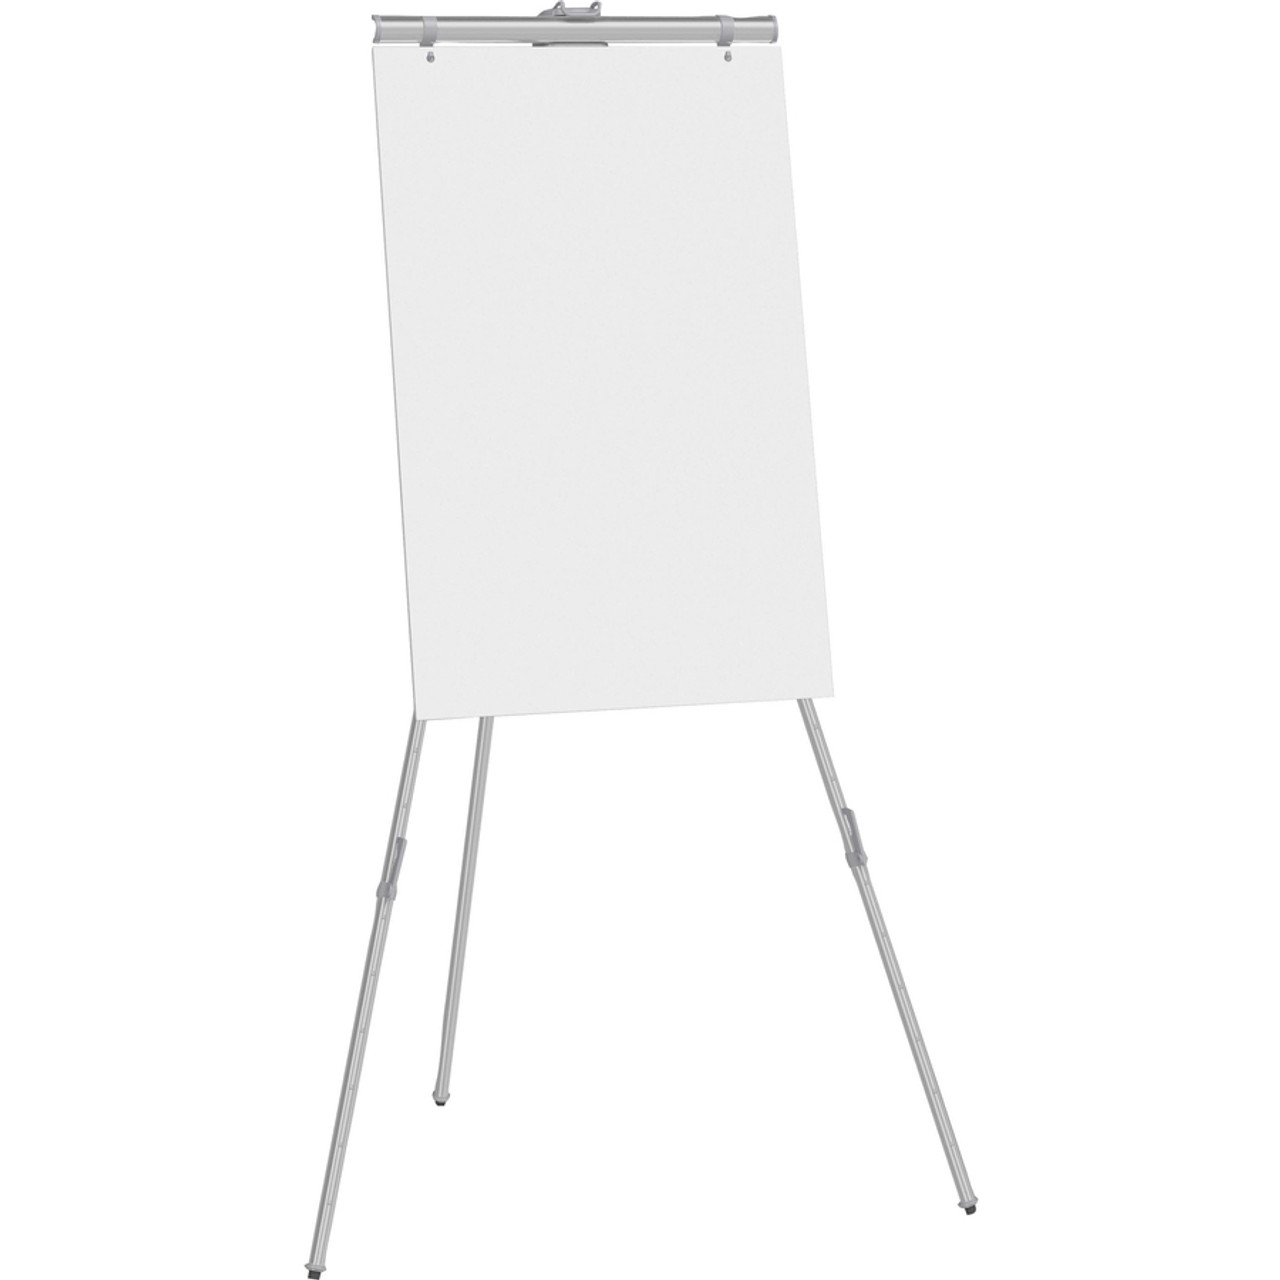 66 Gallery Aluminum Display Easel and Presentation Stand - Large